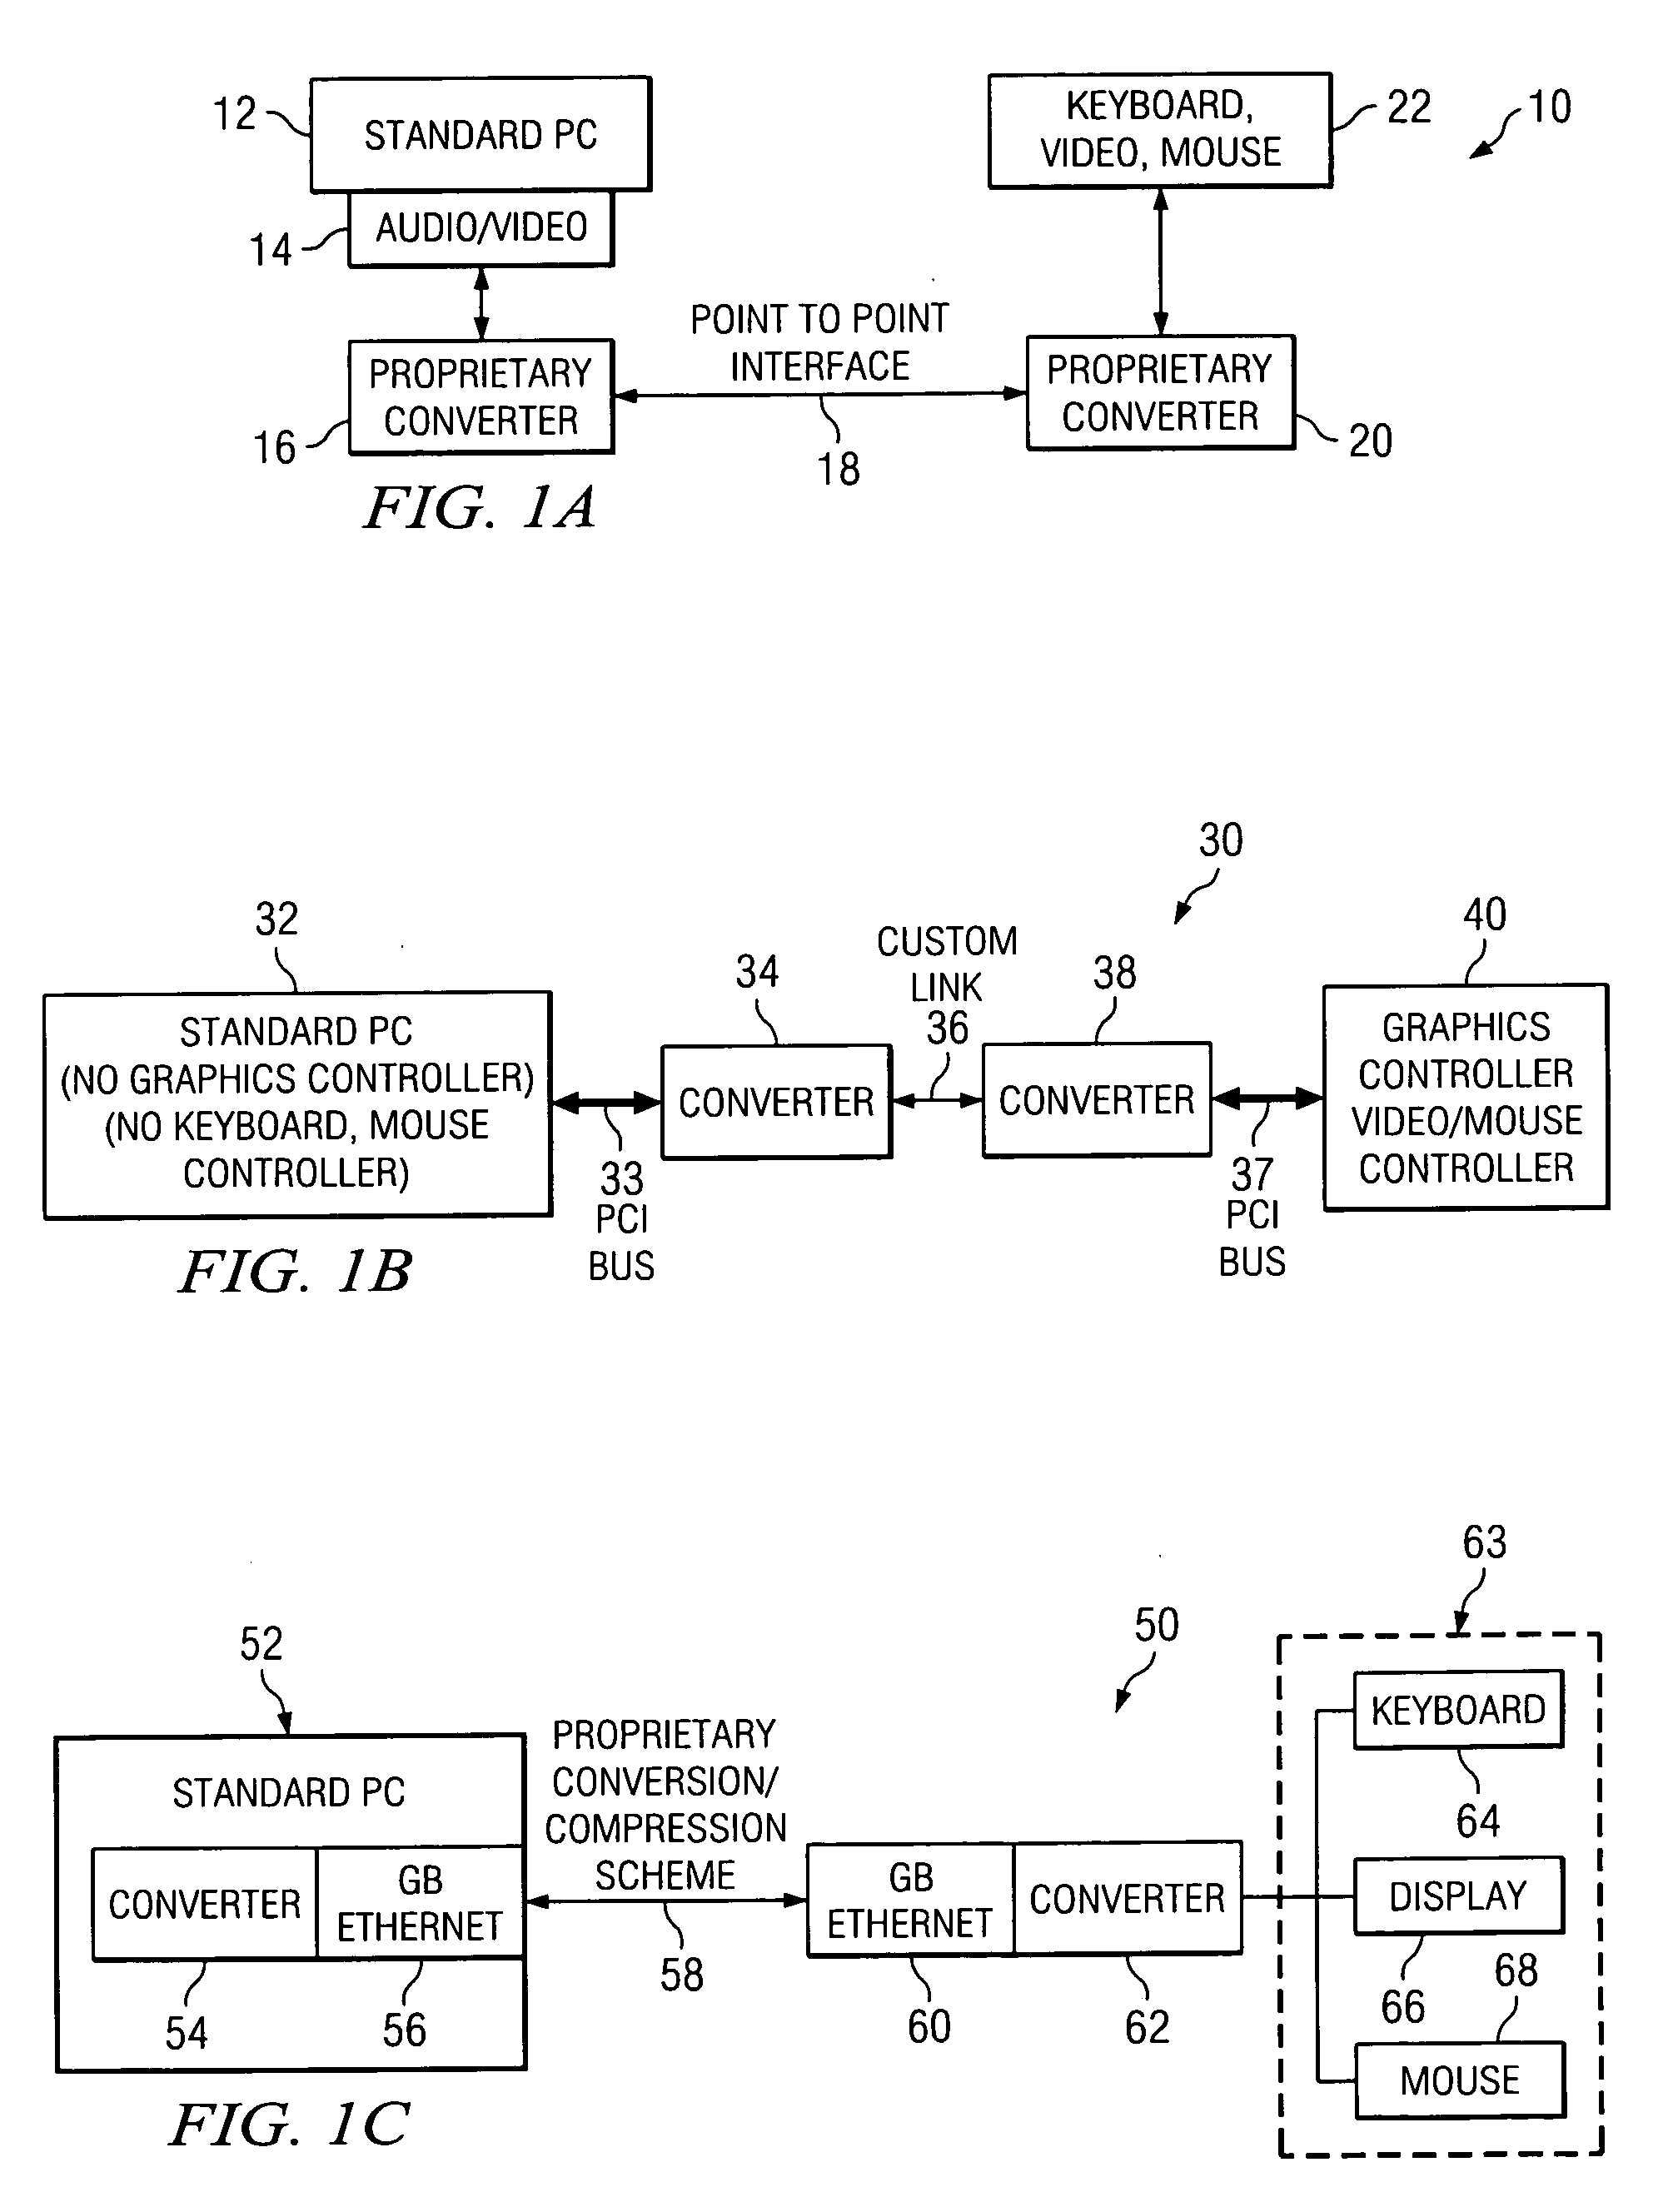 System and method for communicating between a computer cluster and a remote user interface